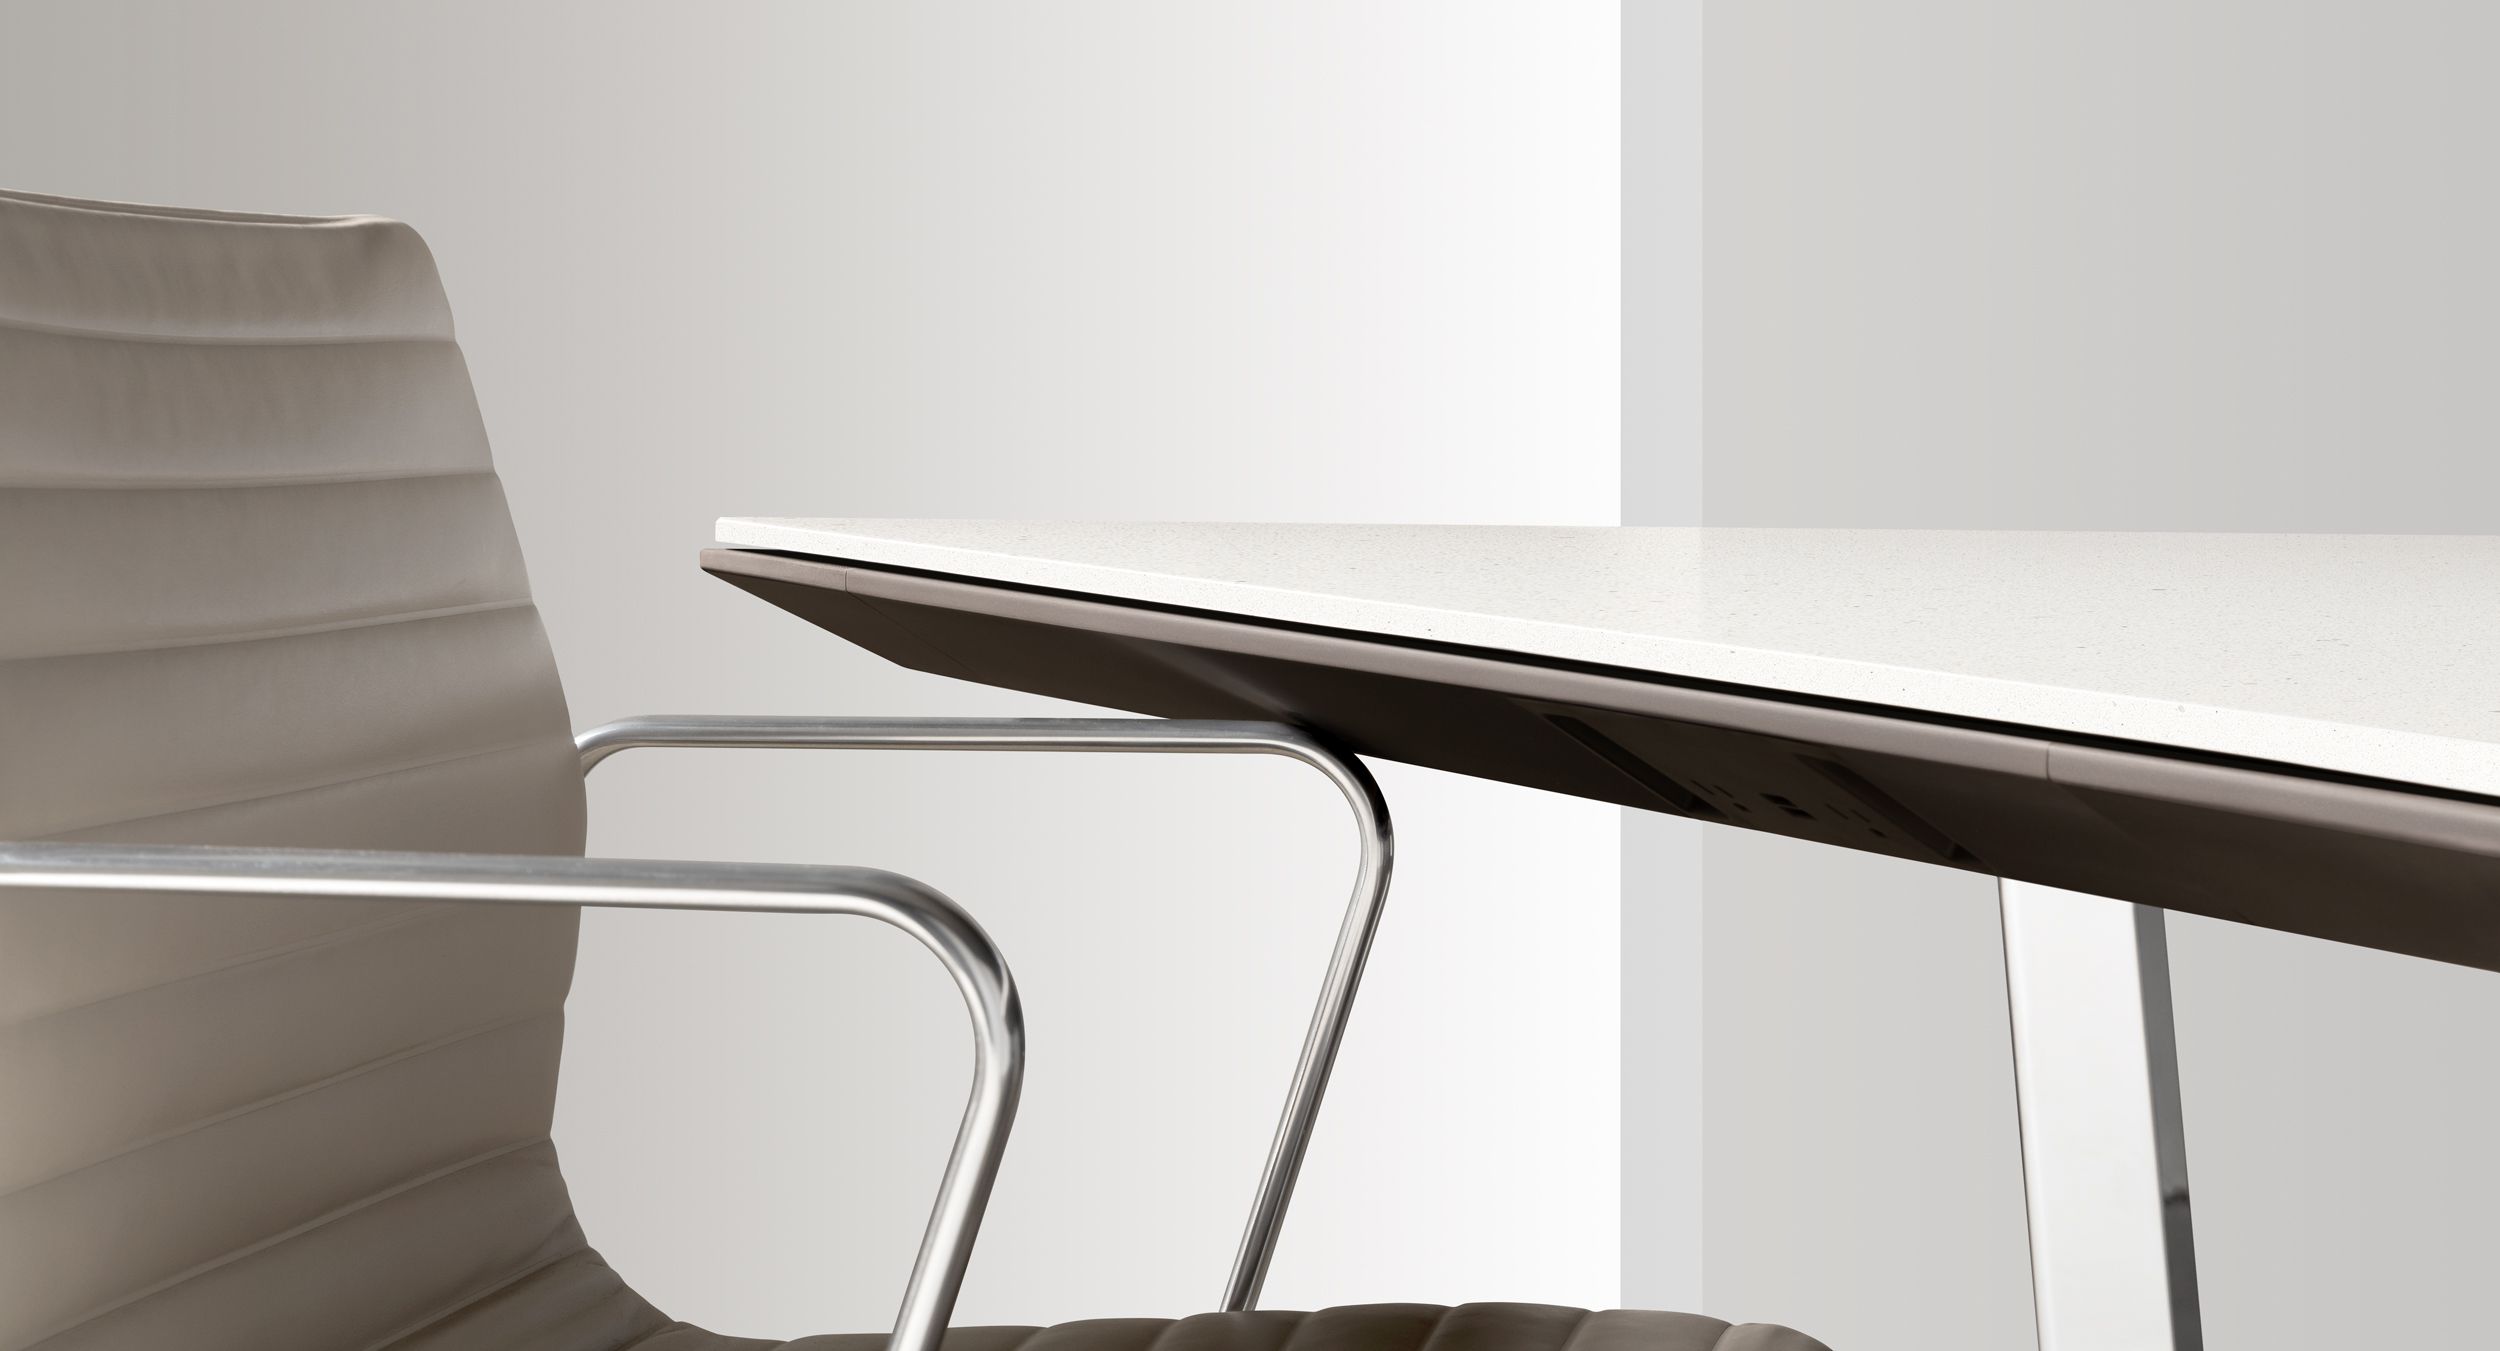 Stunning tables are encircled by the revolutionary Halo soft edge; providing patented protection for table and chair while delivering vital connectivity.